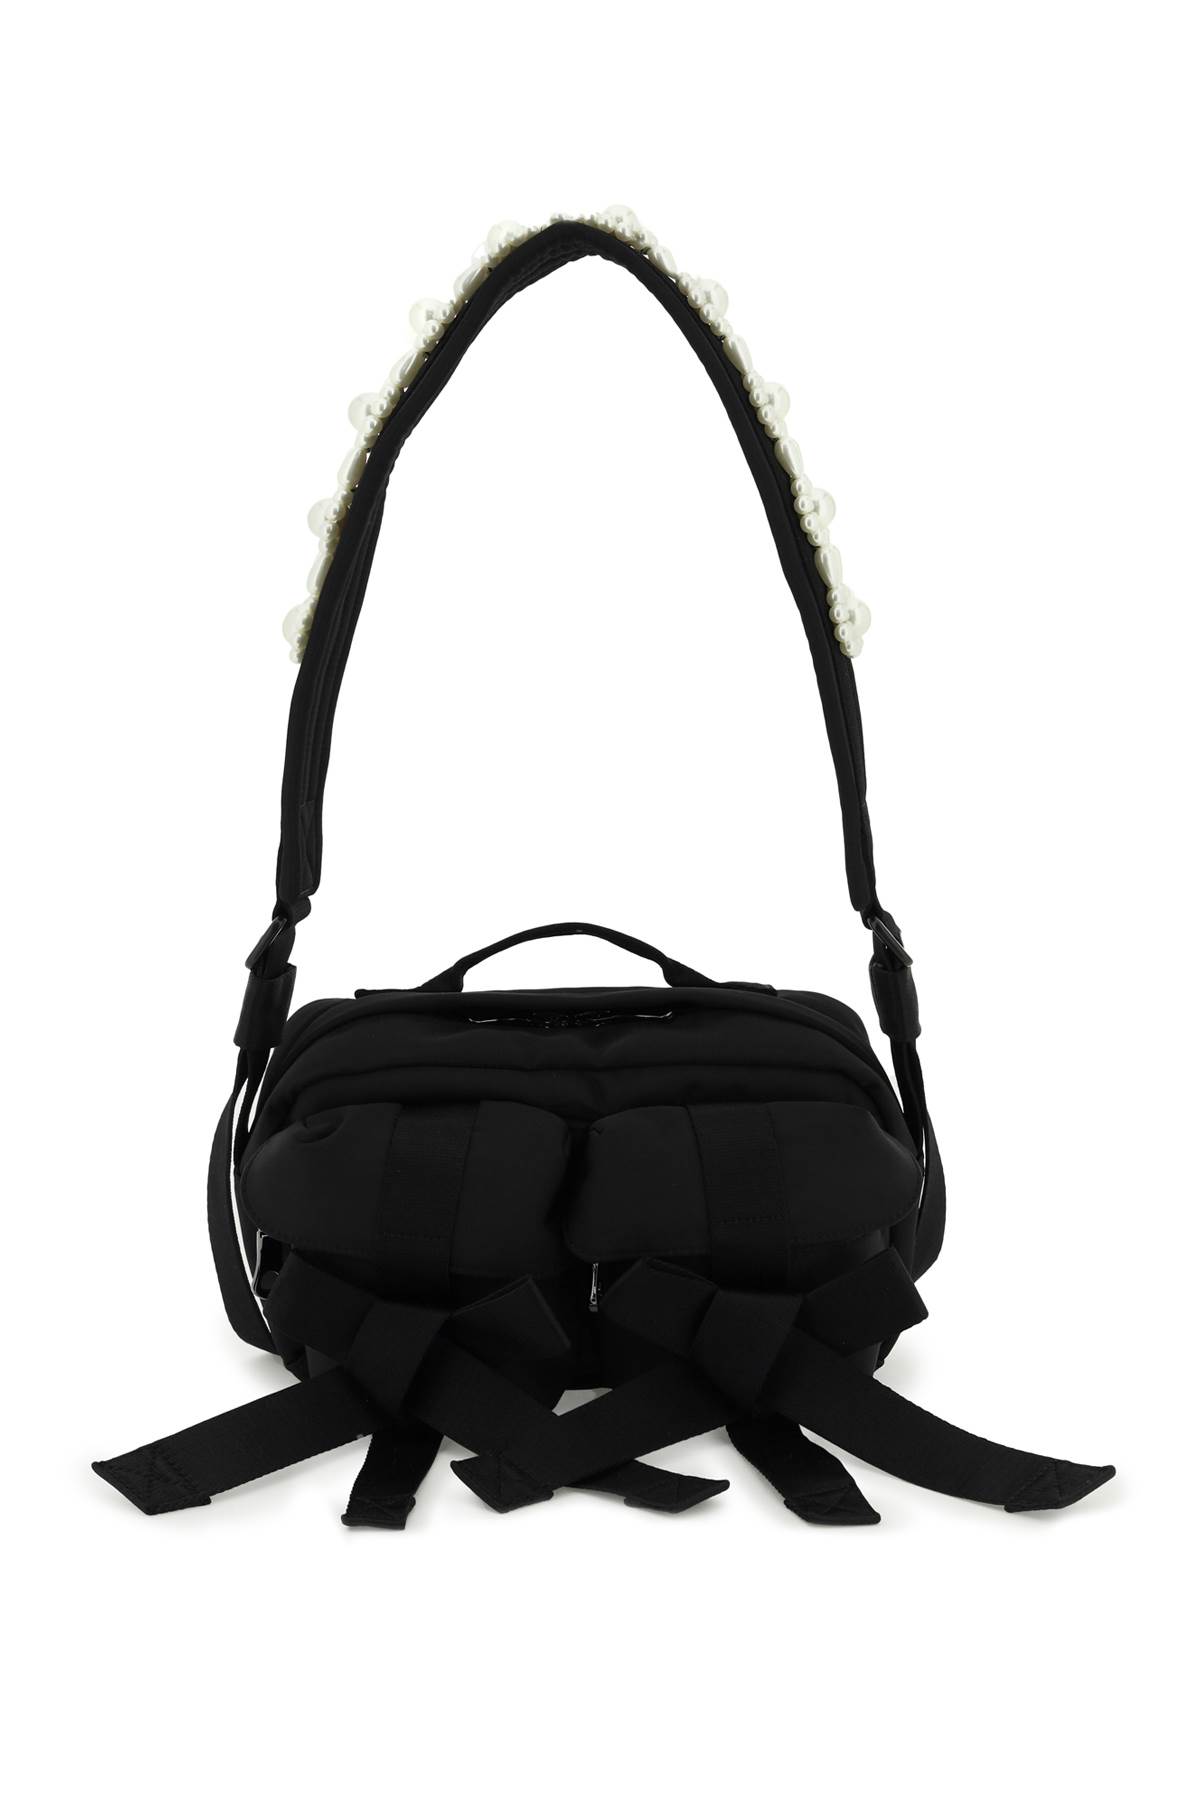 Simone Rocha Nylon Crossbody Bag With Bows And Pearls In Black Pearl ...